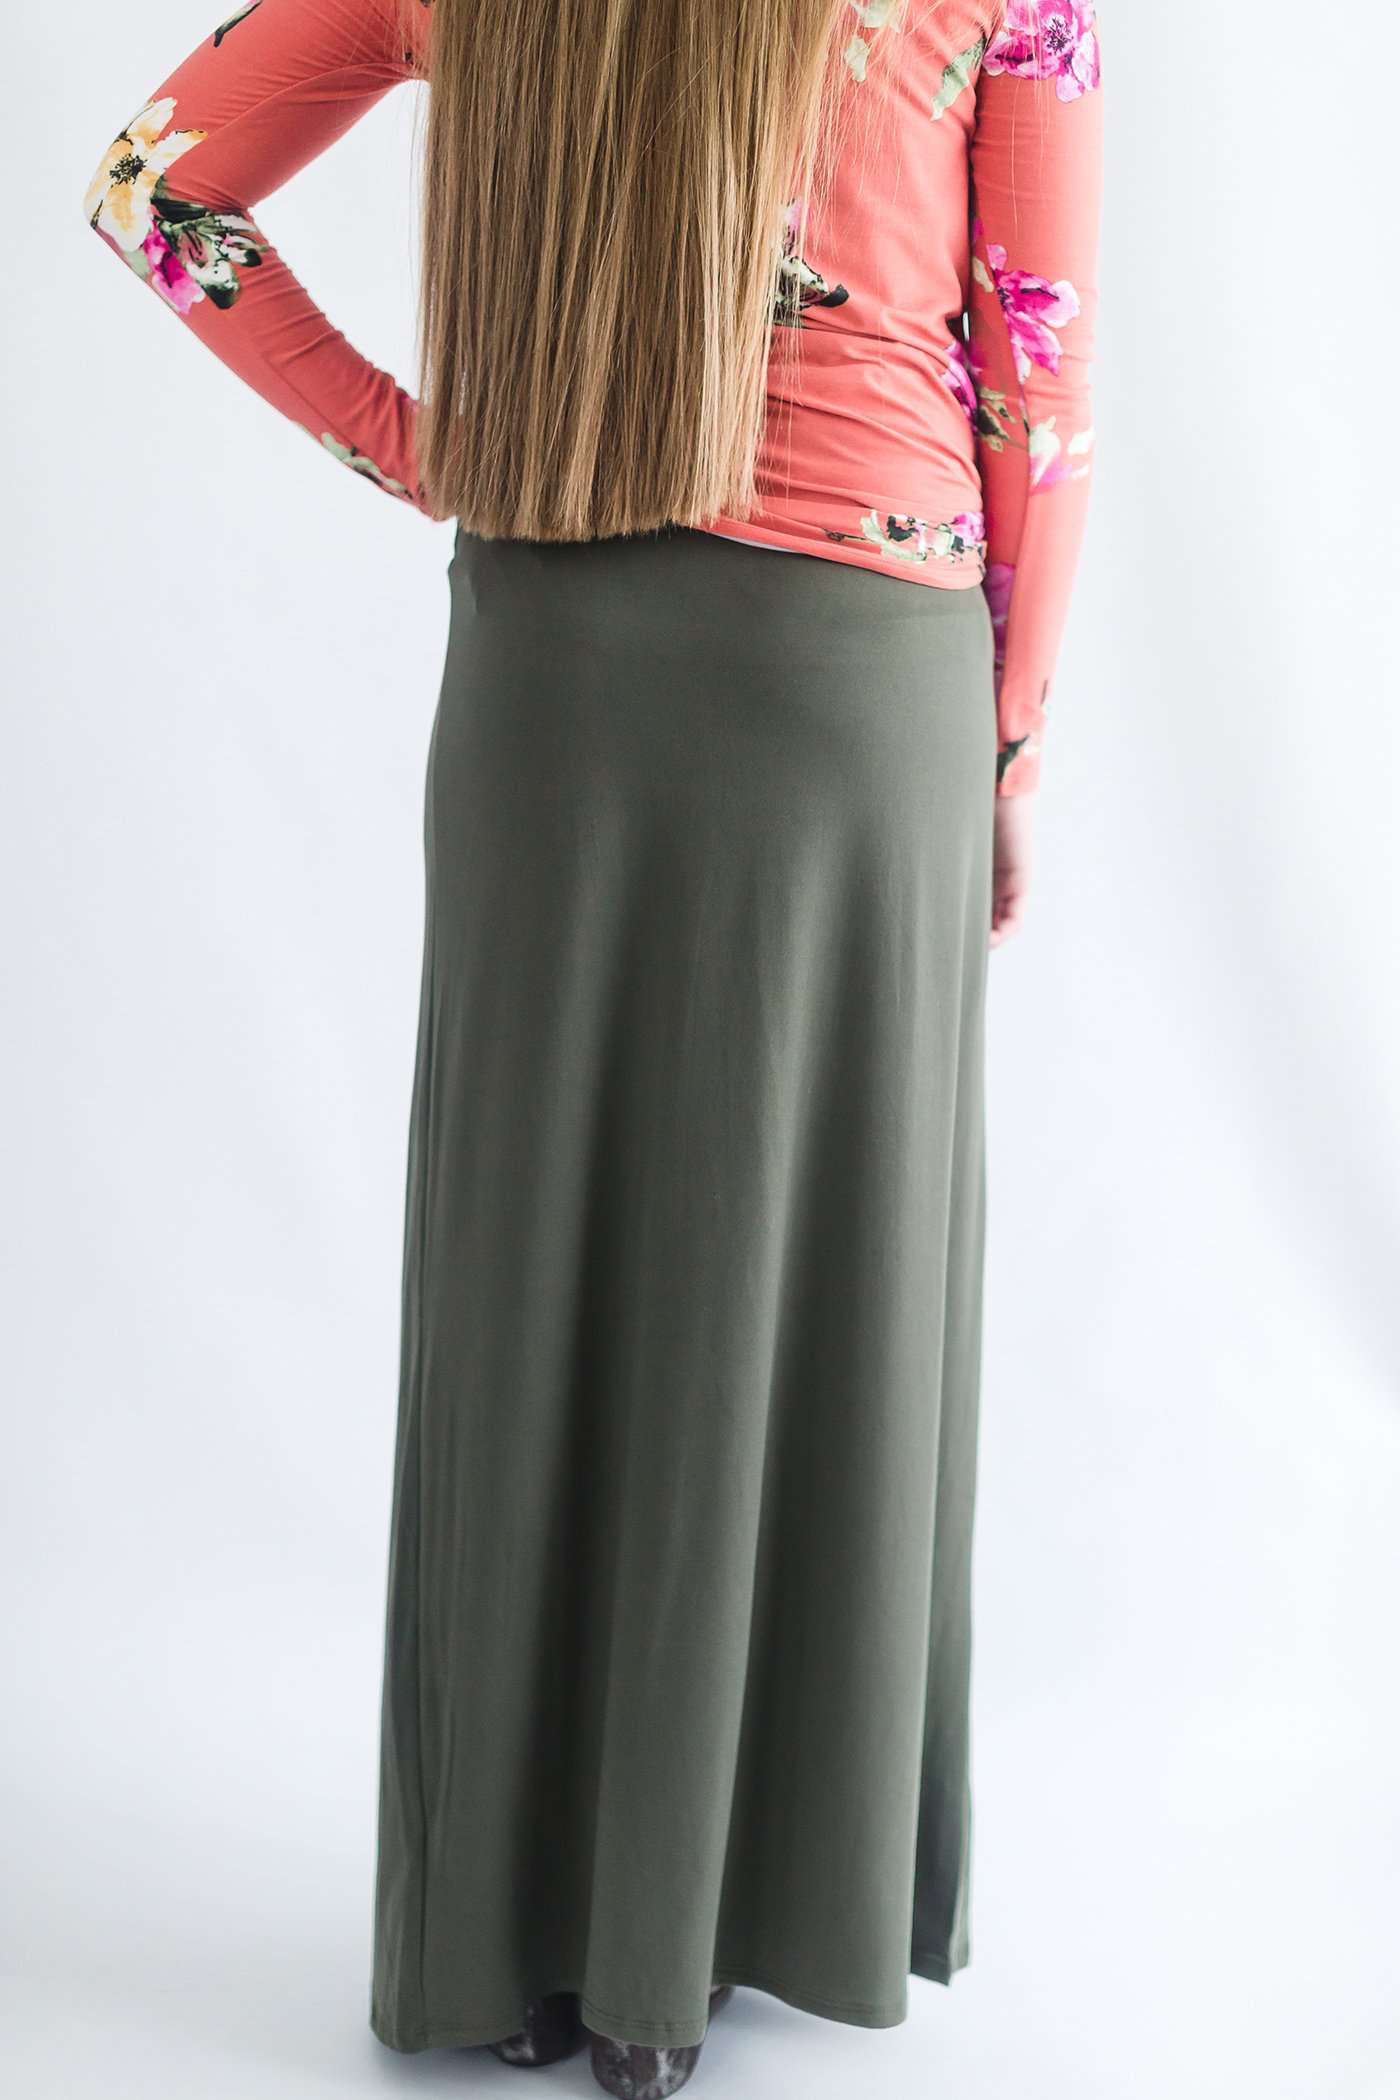 Stretchy modest maxi skirt comes in black, charcoal, olive, burgundy or classic stripe.